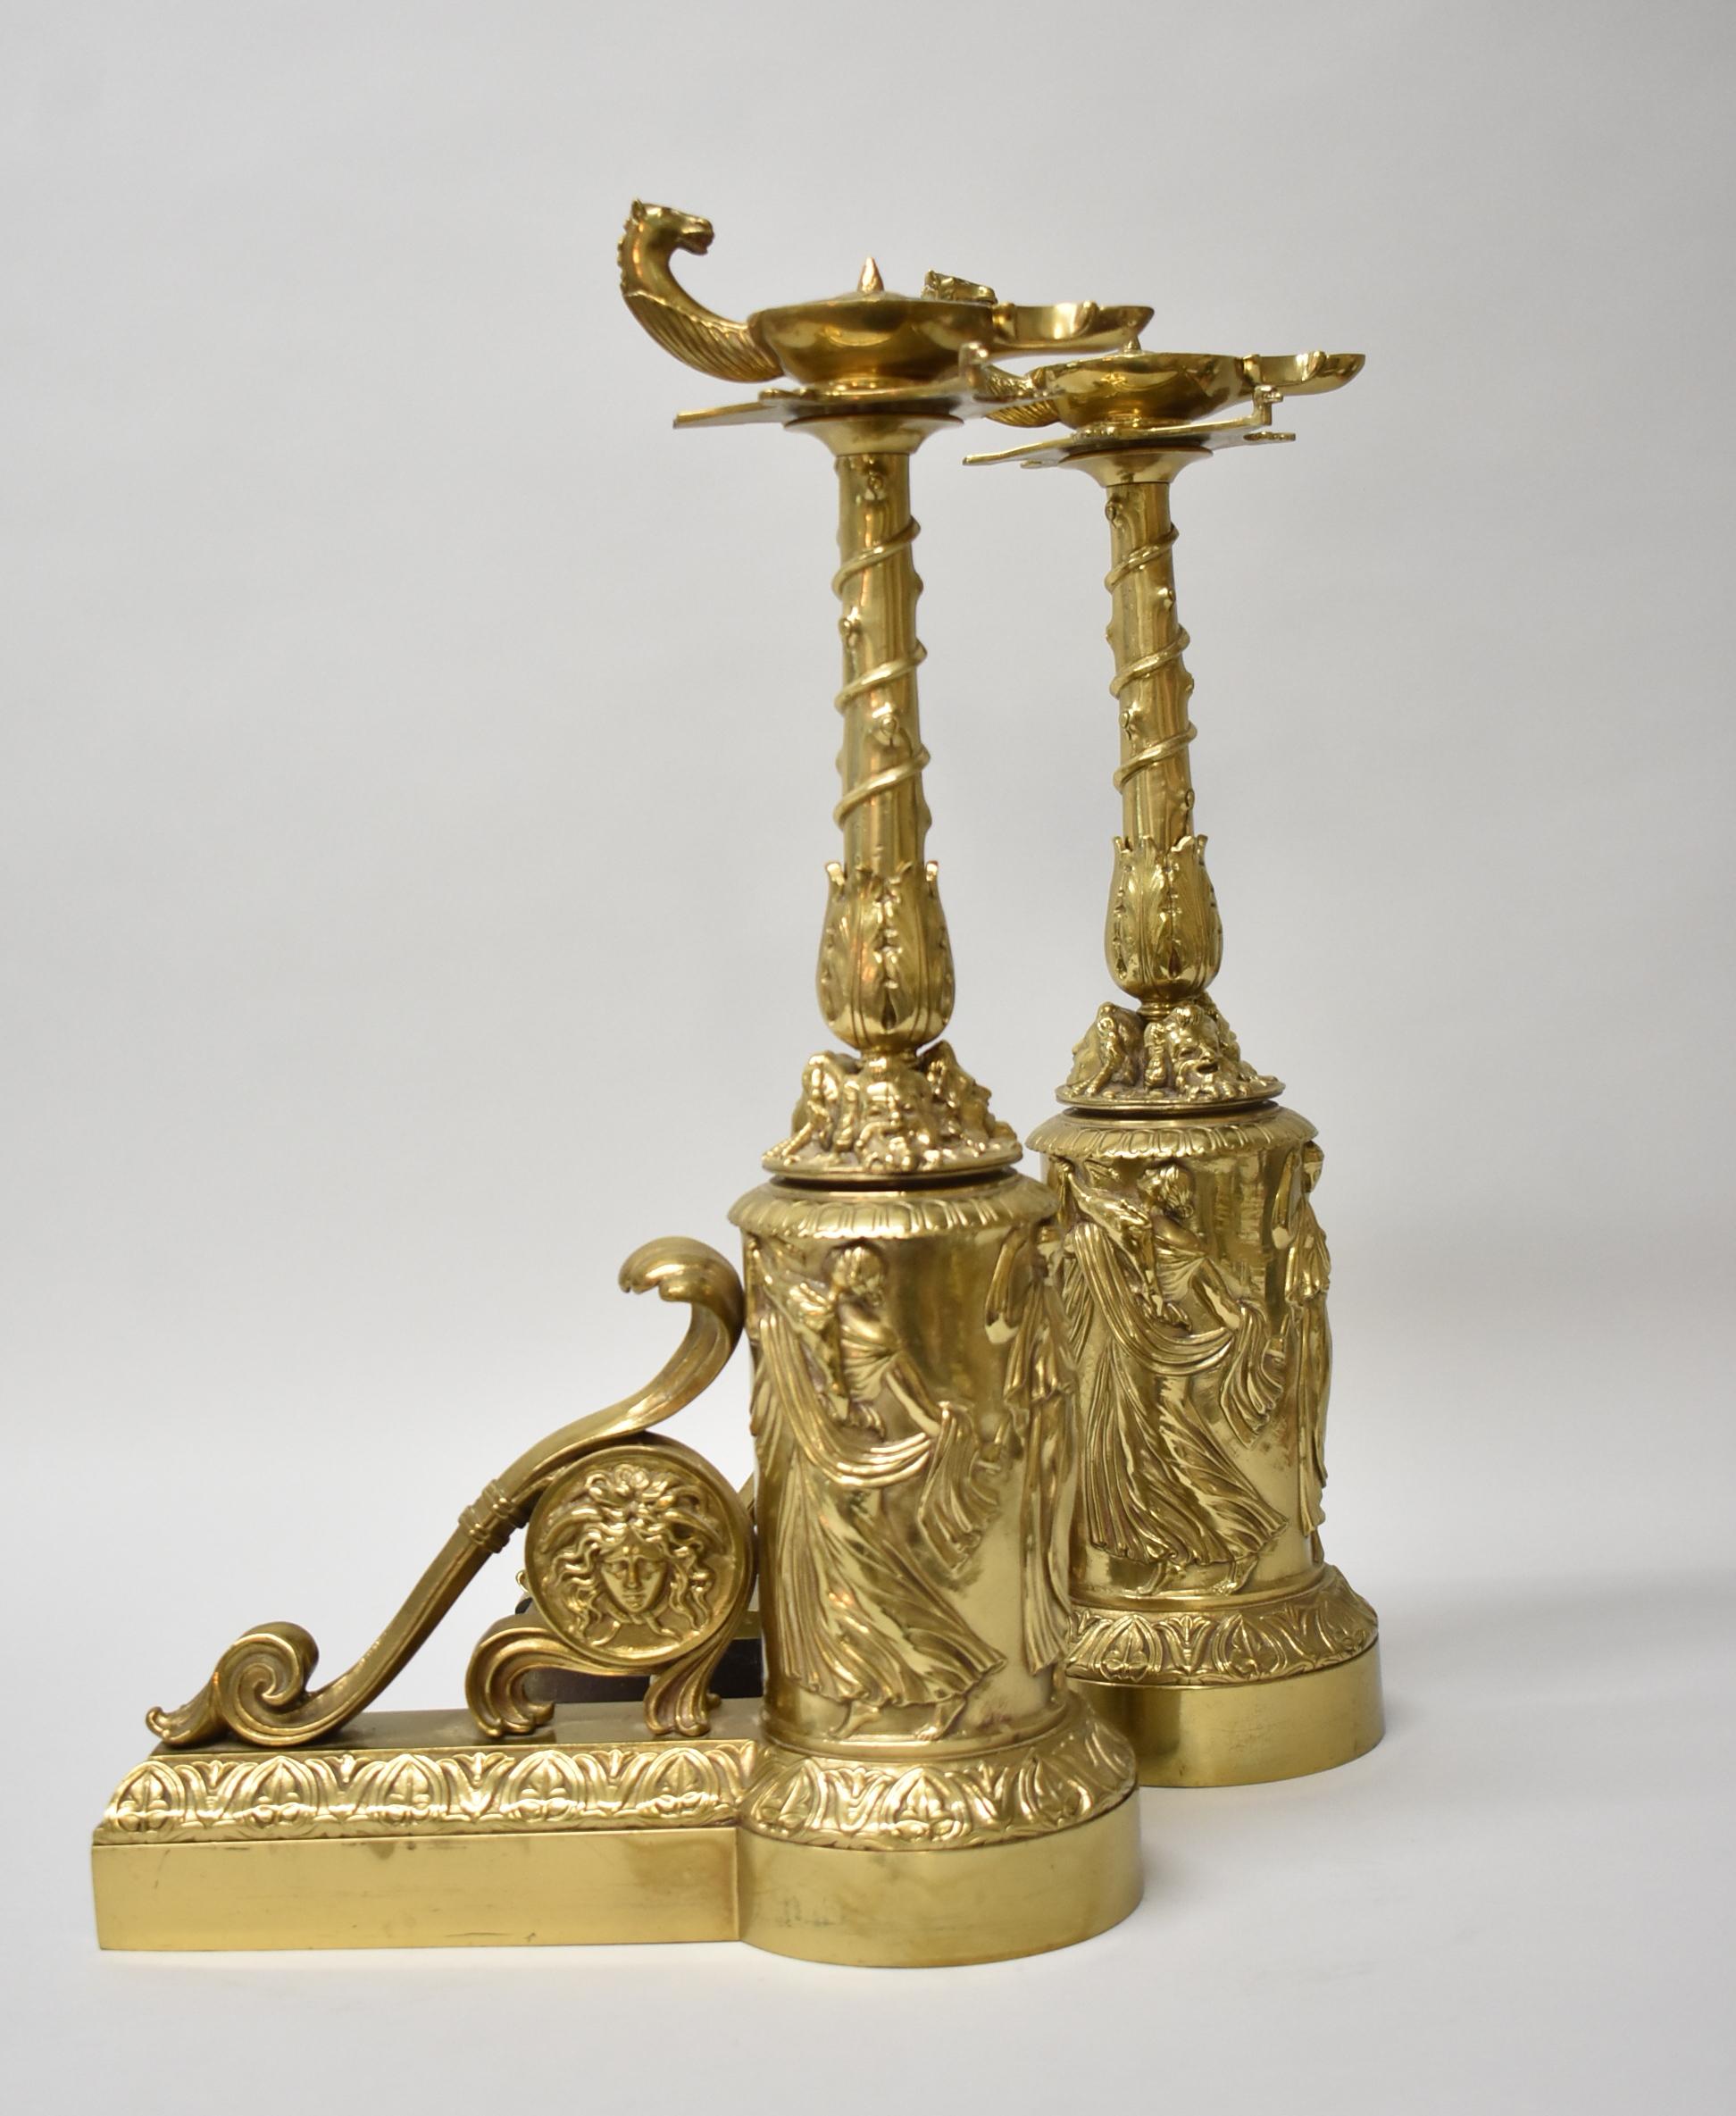 French style cast brass chenets / andirons with acanthus leaf details and raised medusa portrait. Figural horse head at top of finial. Base encircled by robed males and a relief of Bacchus.